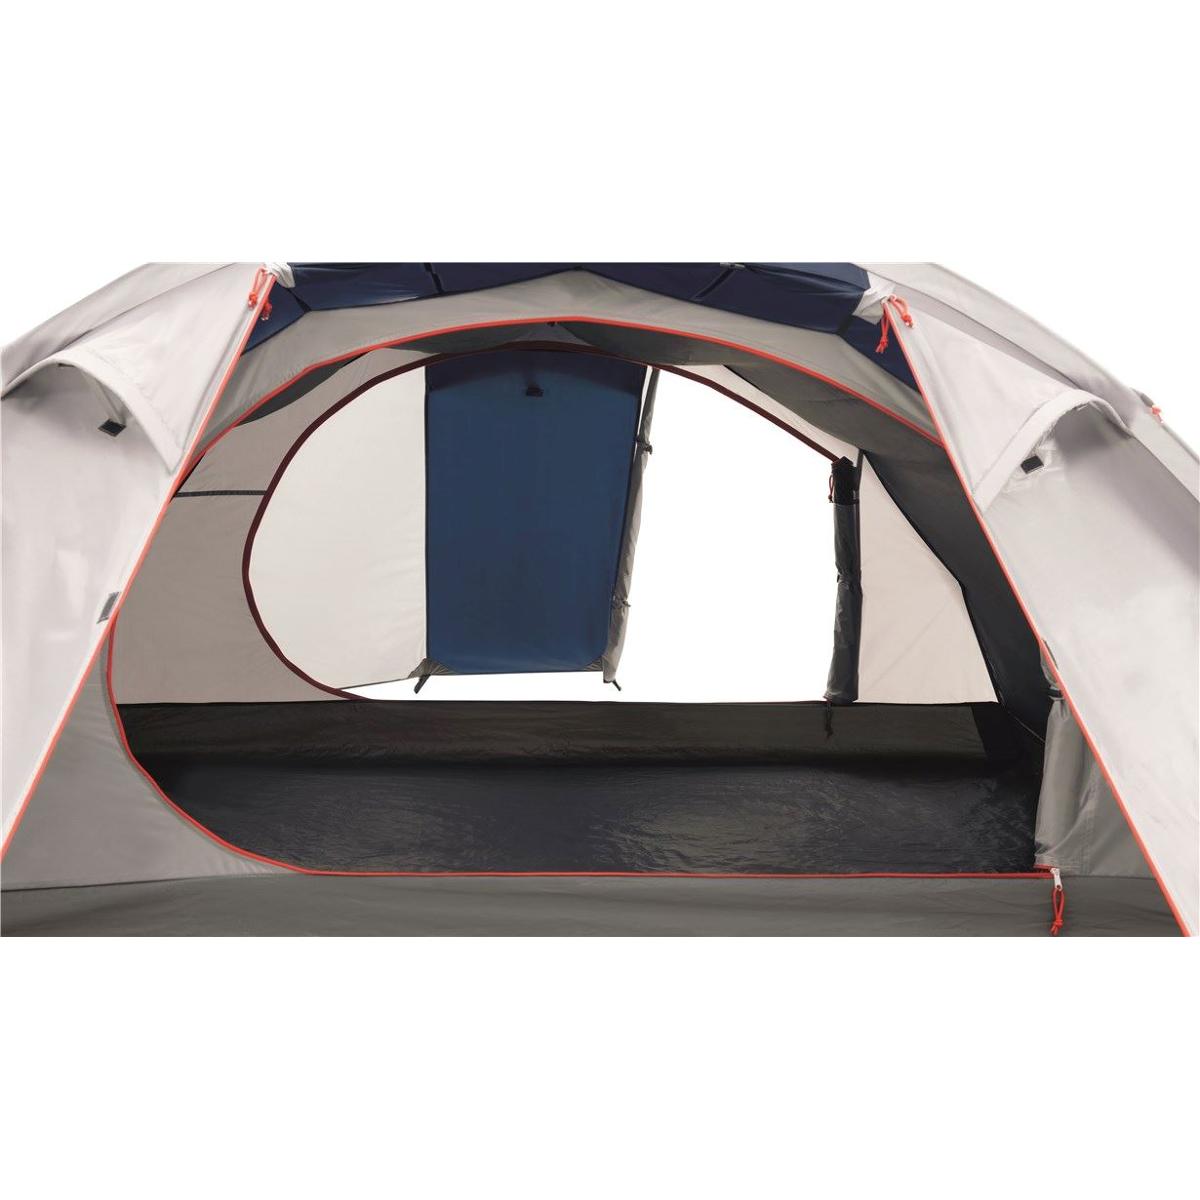 3-Personen, Wagner 300 blau 240x235cm, bei Easy Tunnelzelt, Compact Vega Camping Campingzubehör Camp